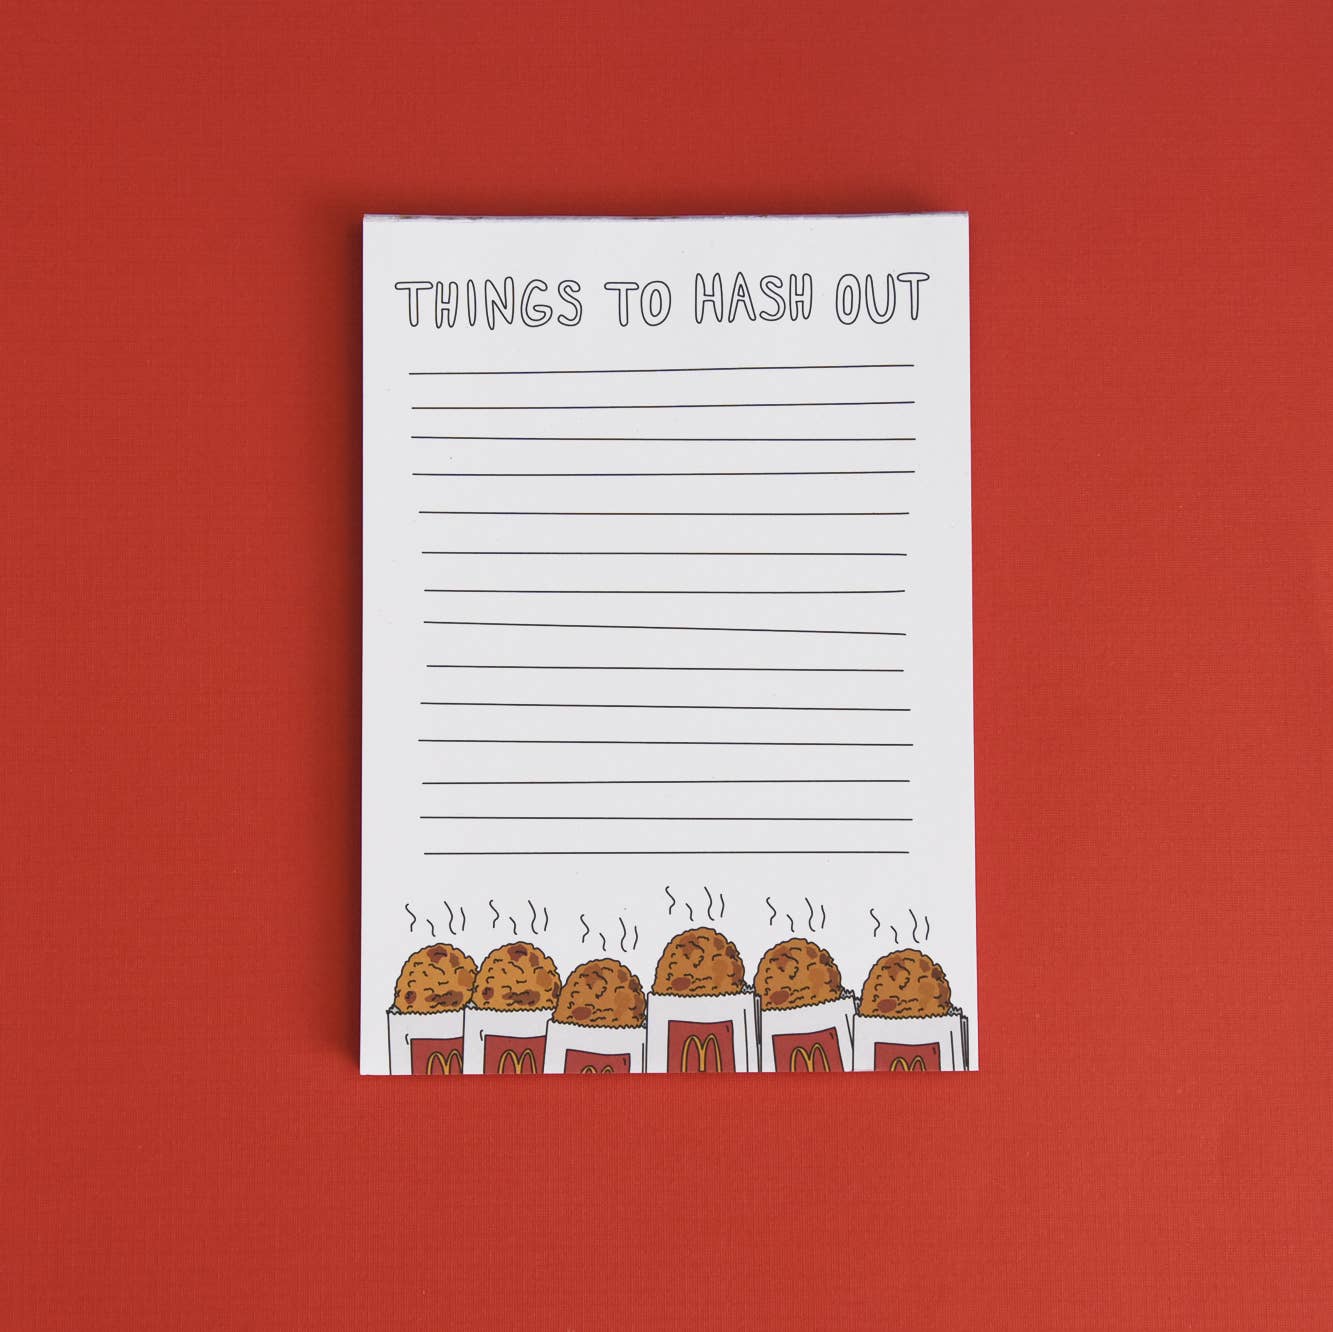 Notepad that reads "Things to Hash Out" up top and has blank lines with hash browns lining the bottom 